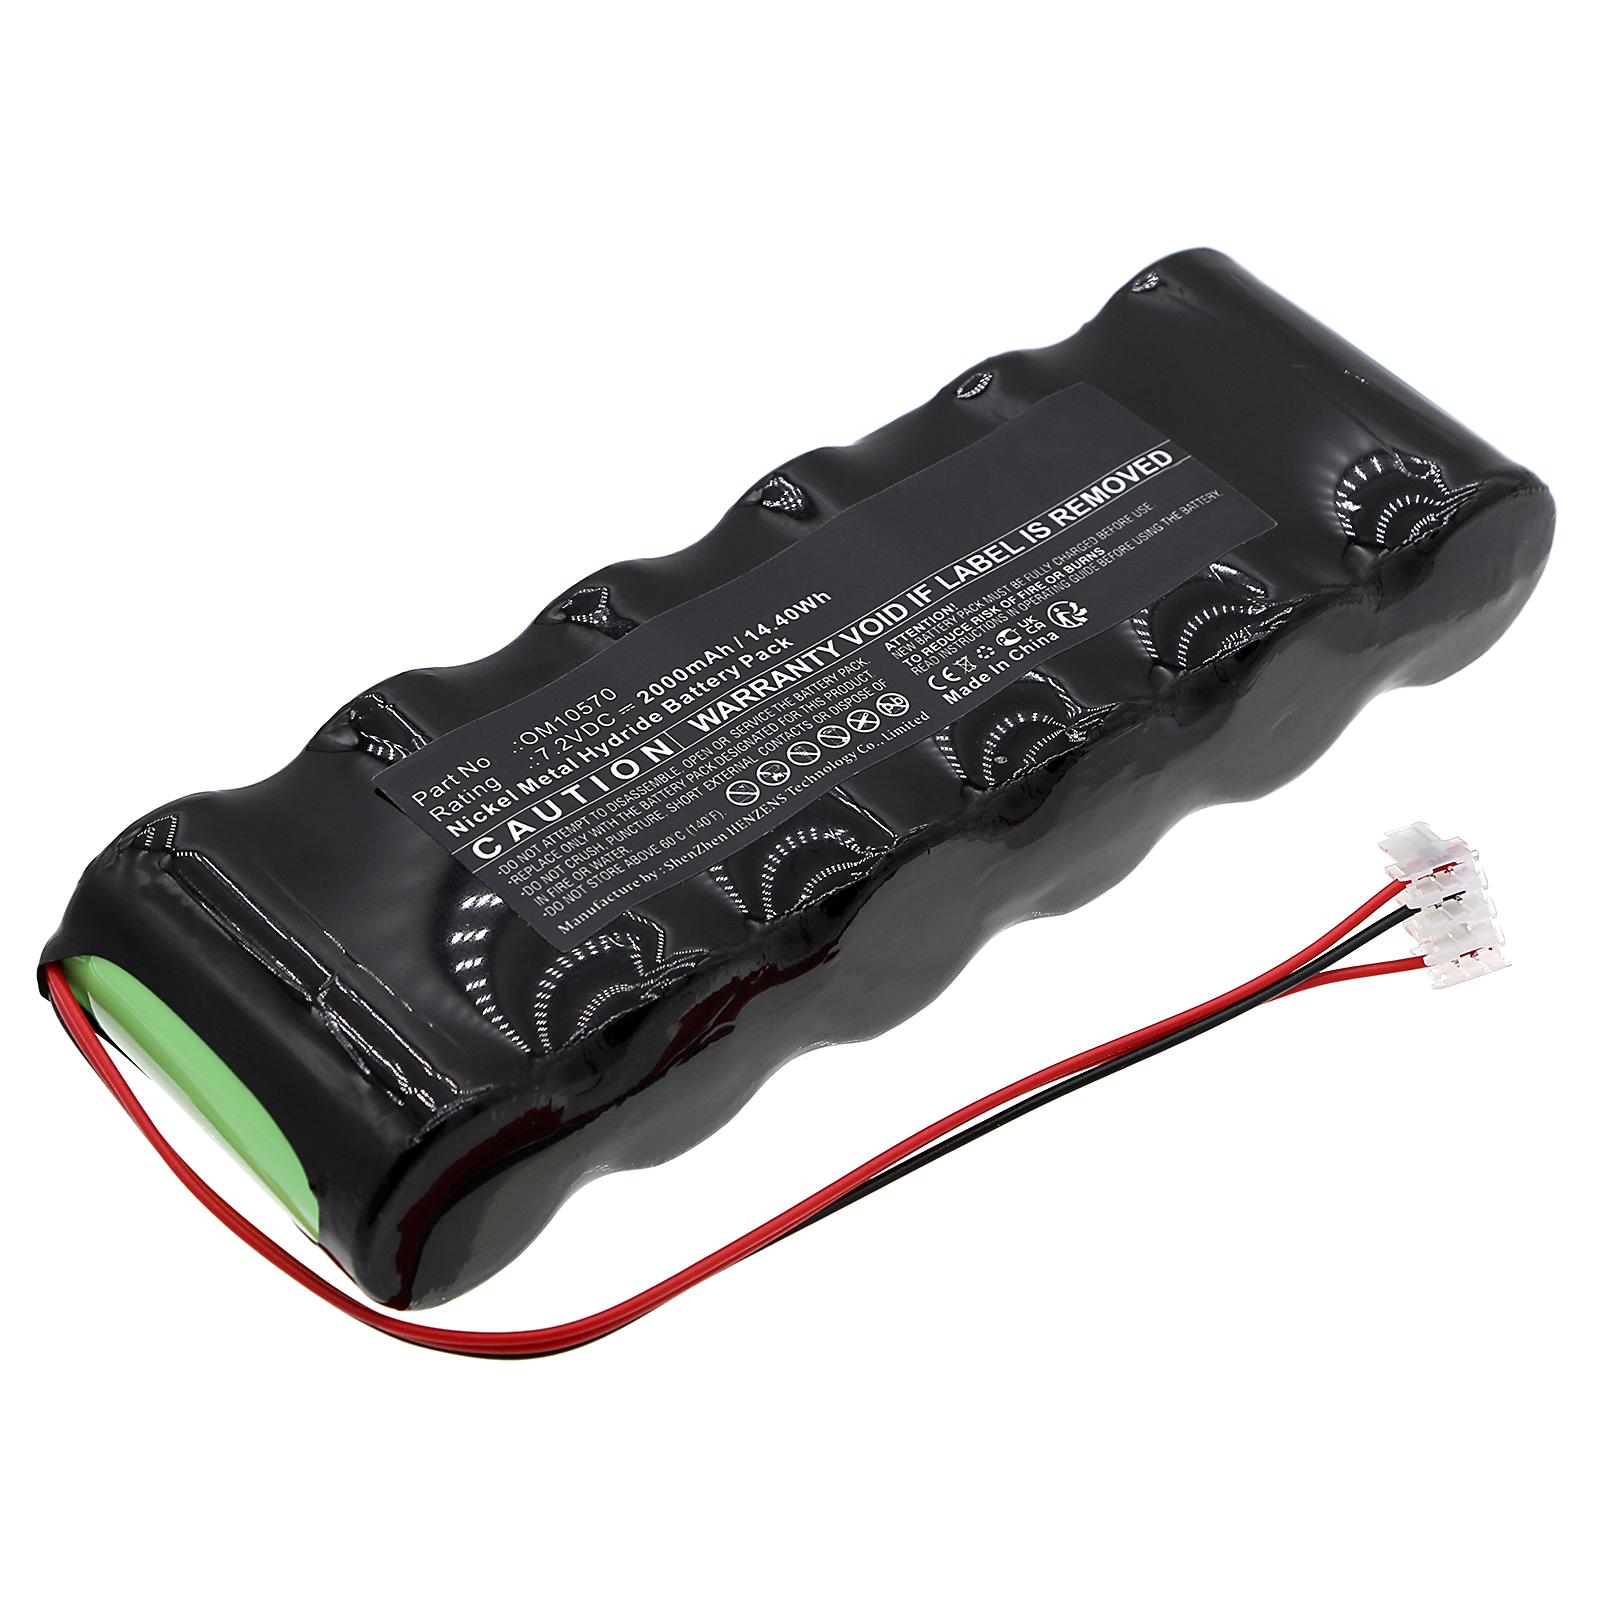 Synergy Digital Medical Battery, Compatible with Medex B10570 Medical Battery (Ni-MH, 7.2V, 2000mAh)